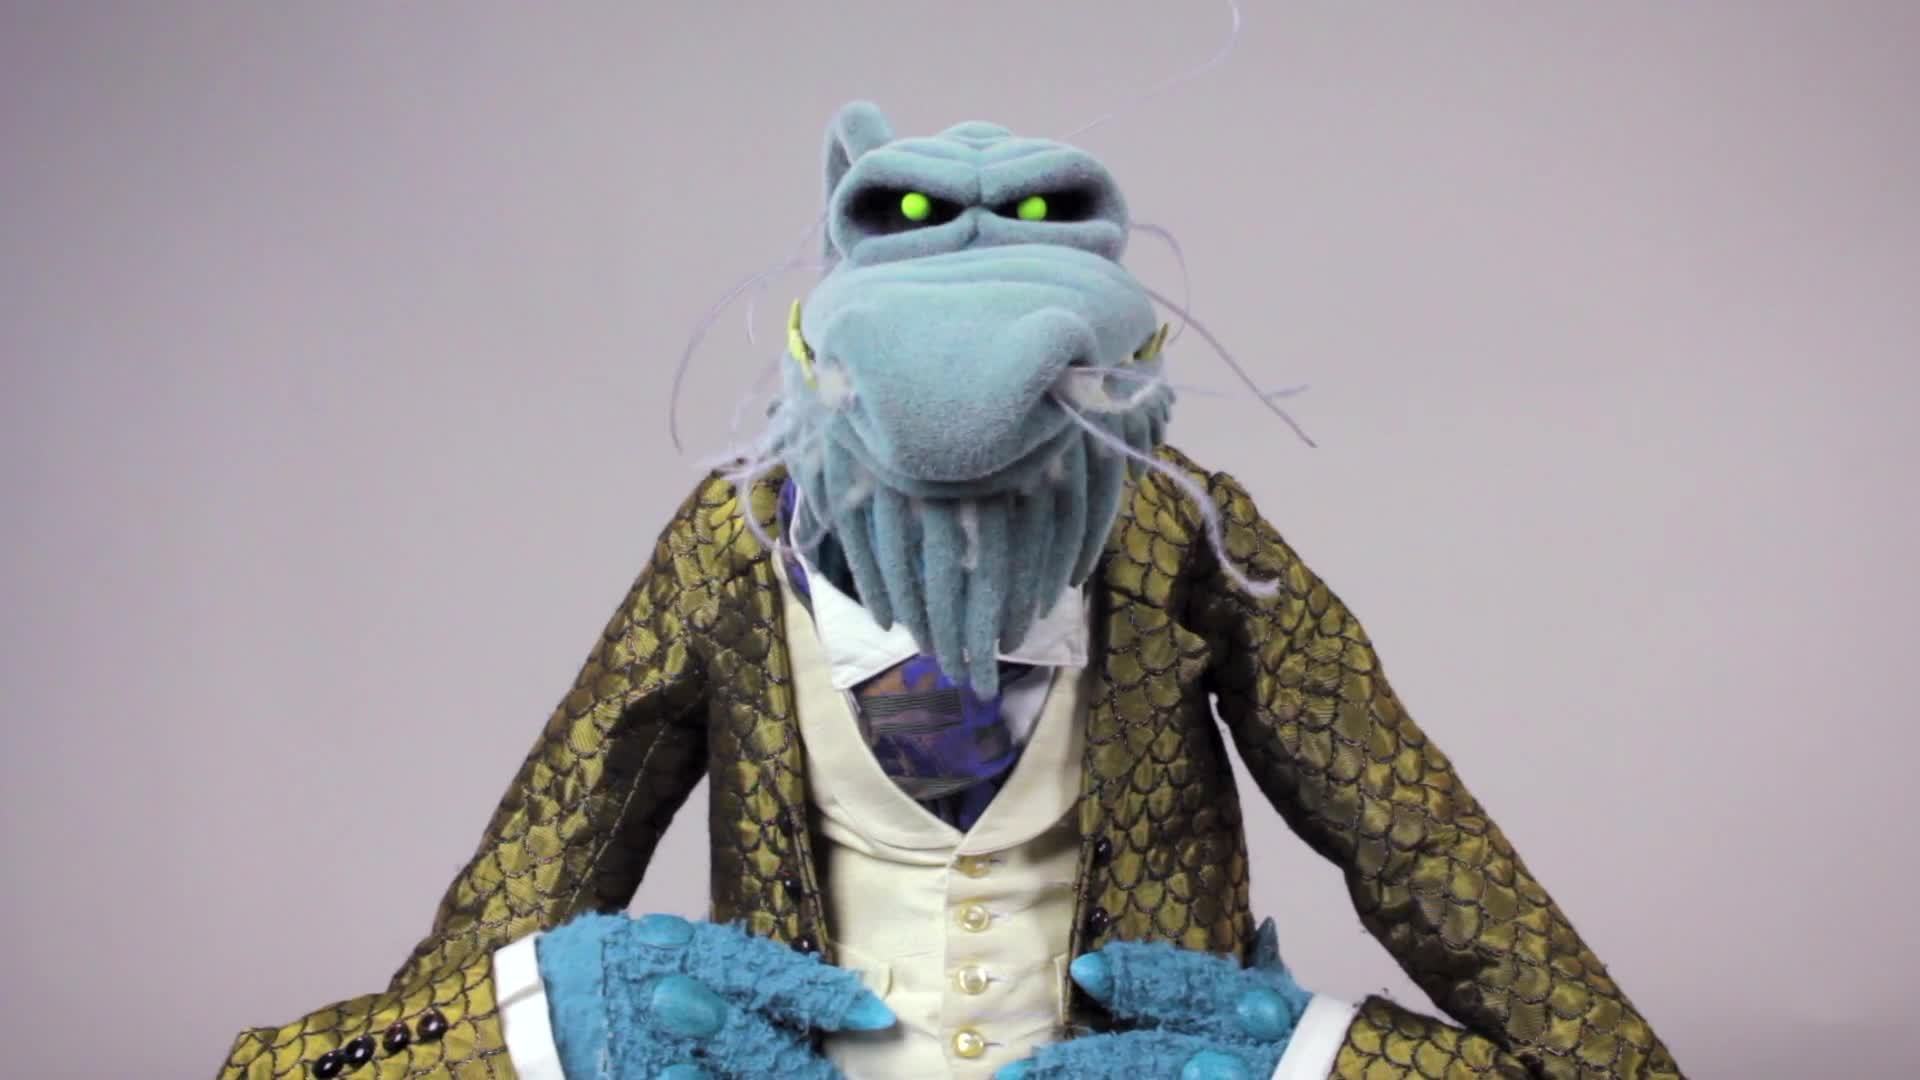 Walter Does Something Unexpected | Muppet Thought of the Week by The Muppets